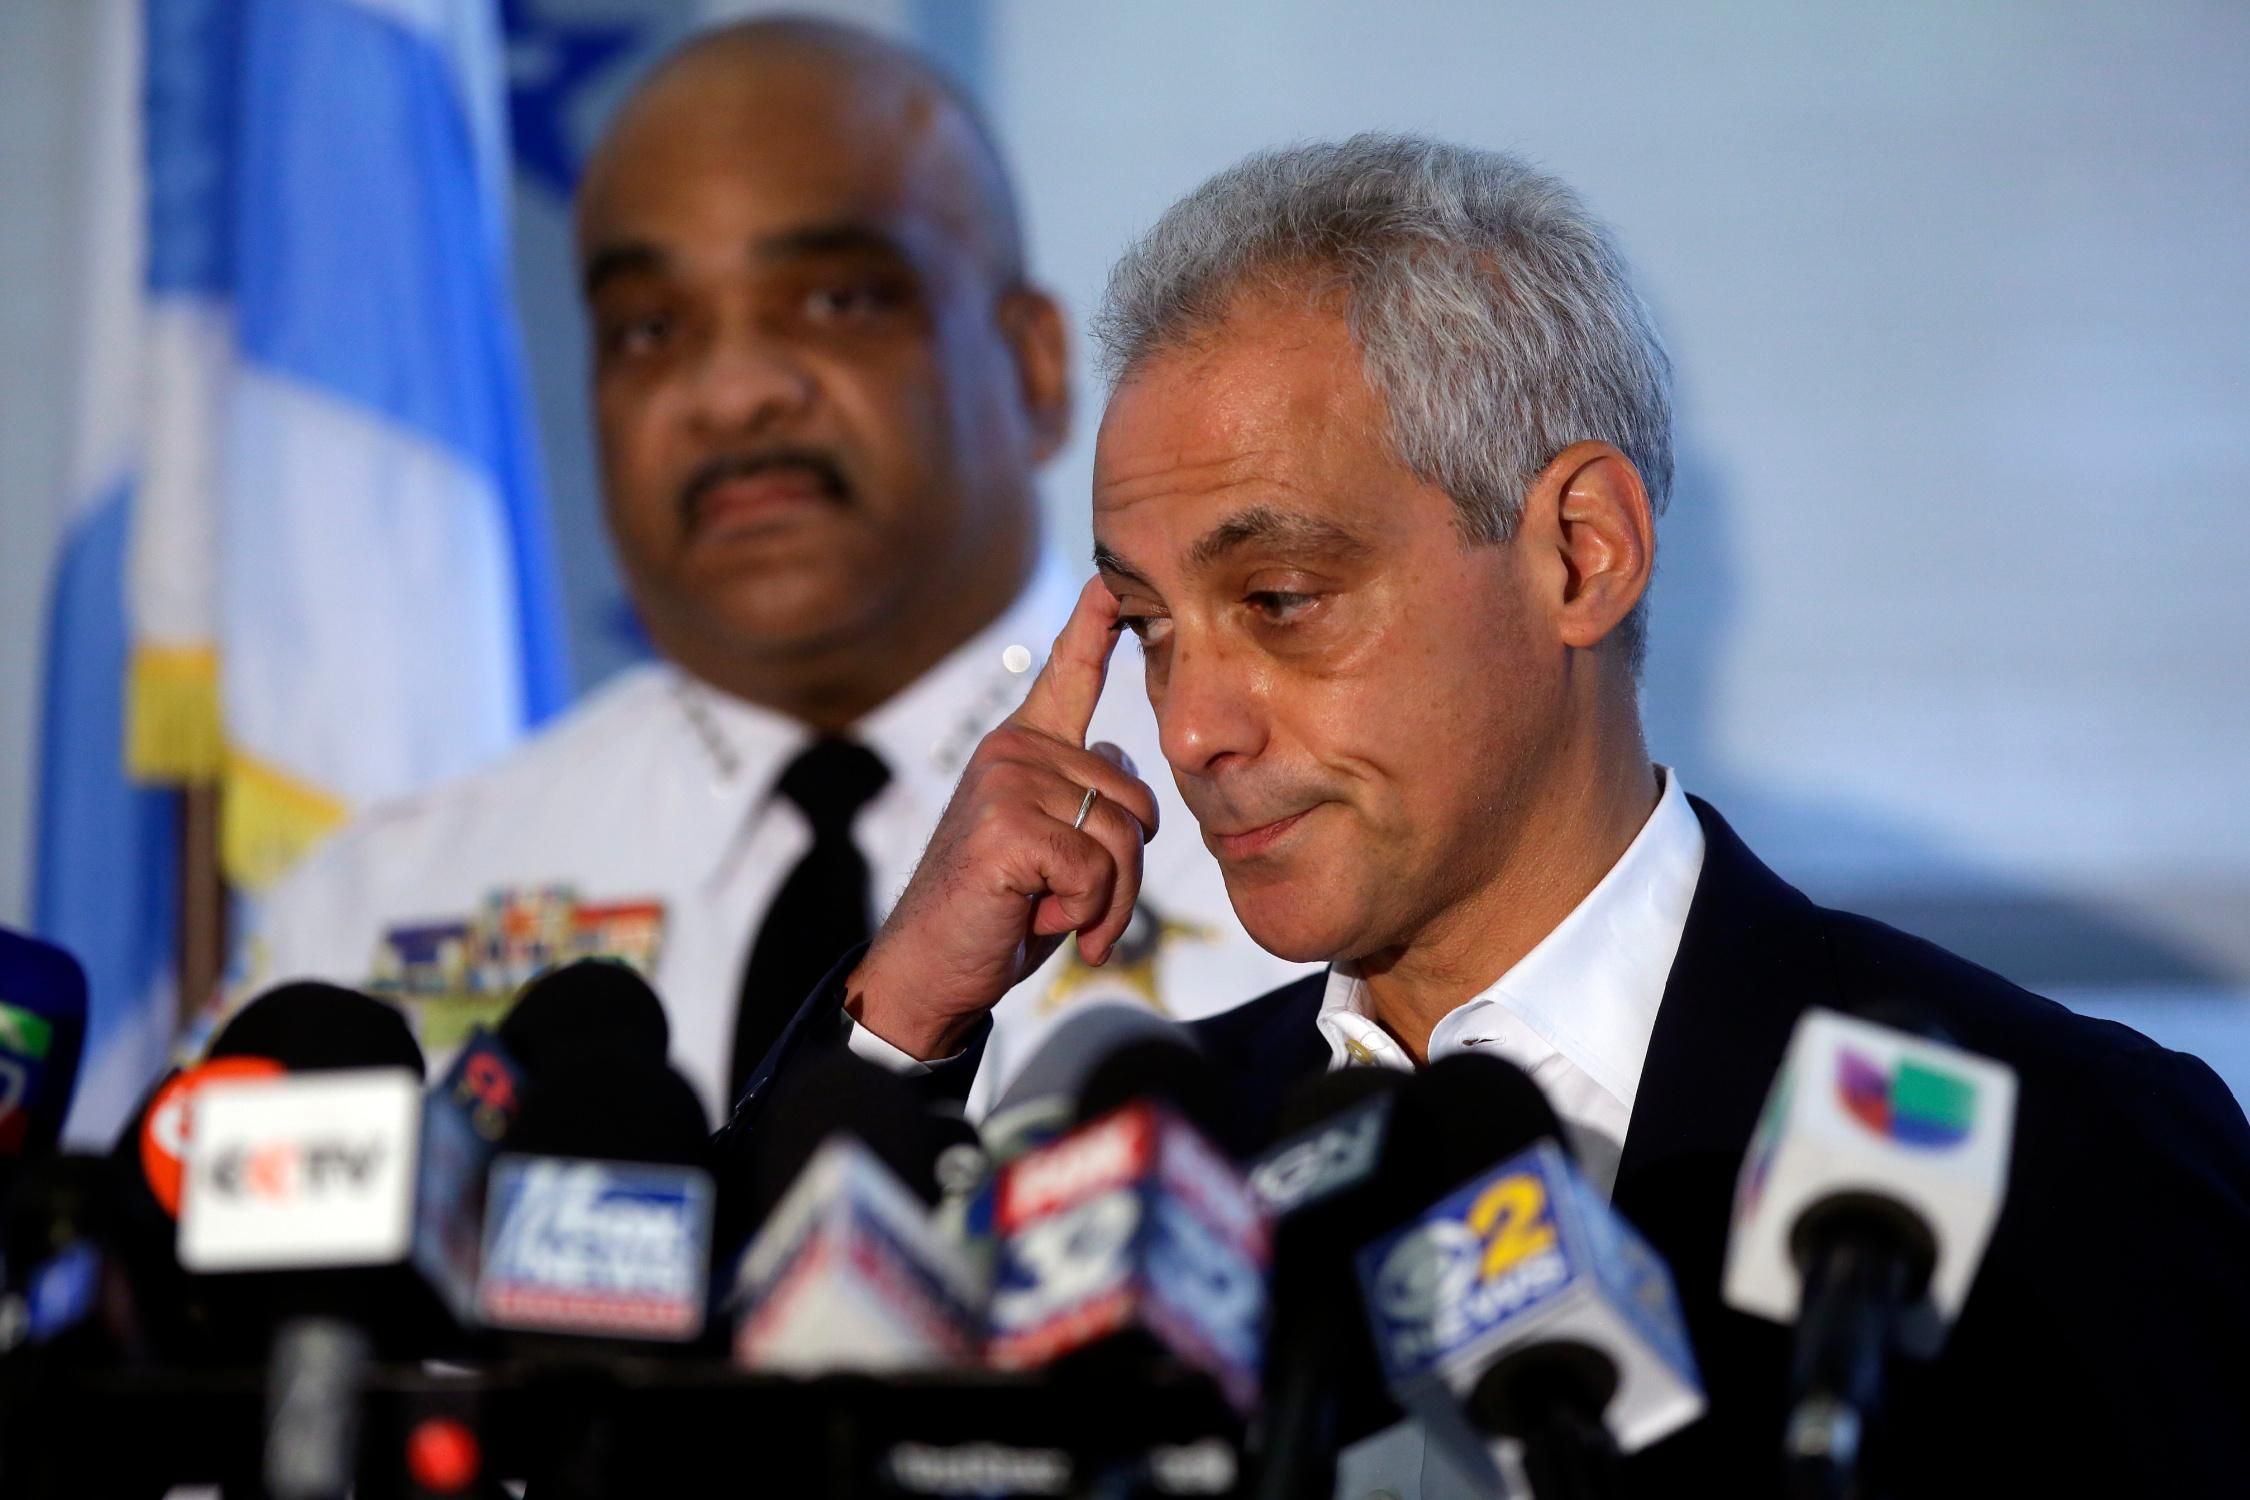 Former Chicago Mayor Rahm Emanuel speaks during a news conference at the Chicago Police Department's 6th District station on August 6, 2018.